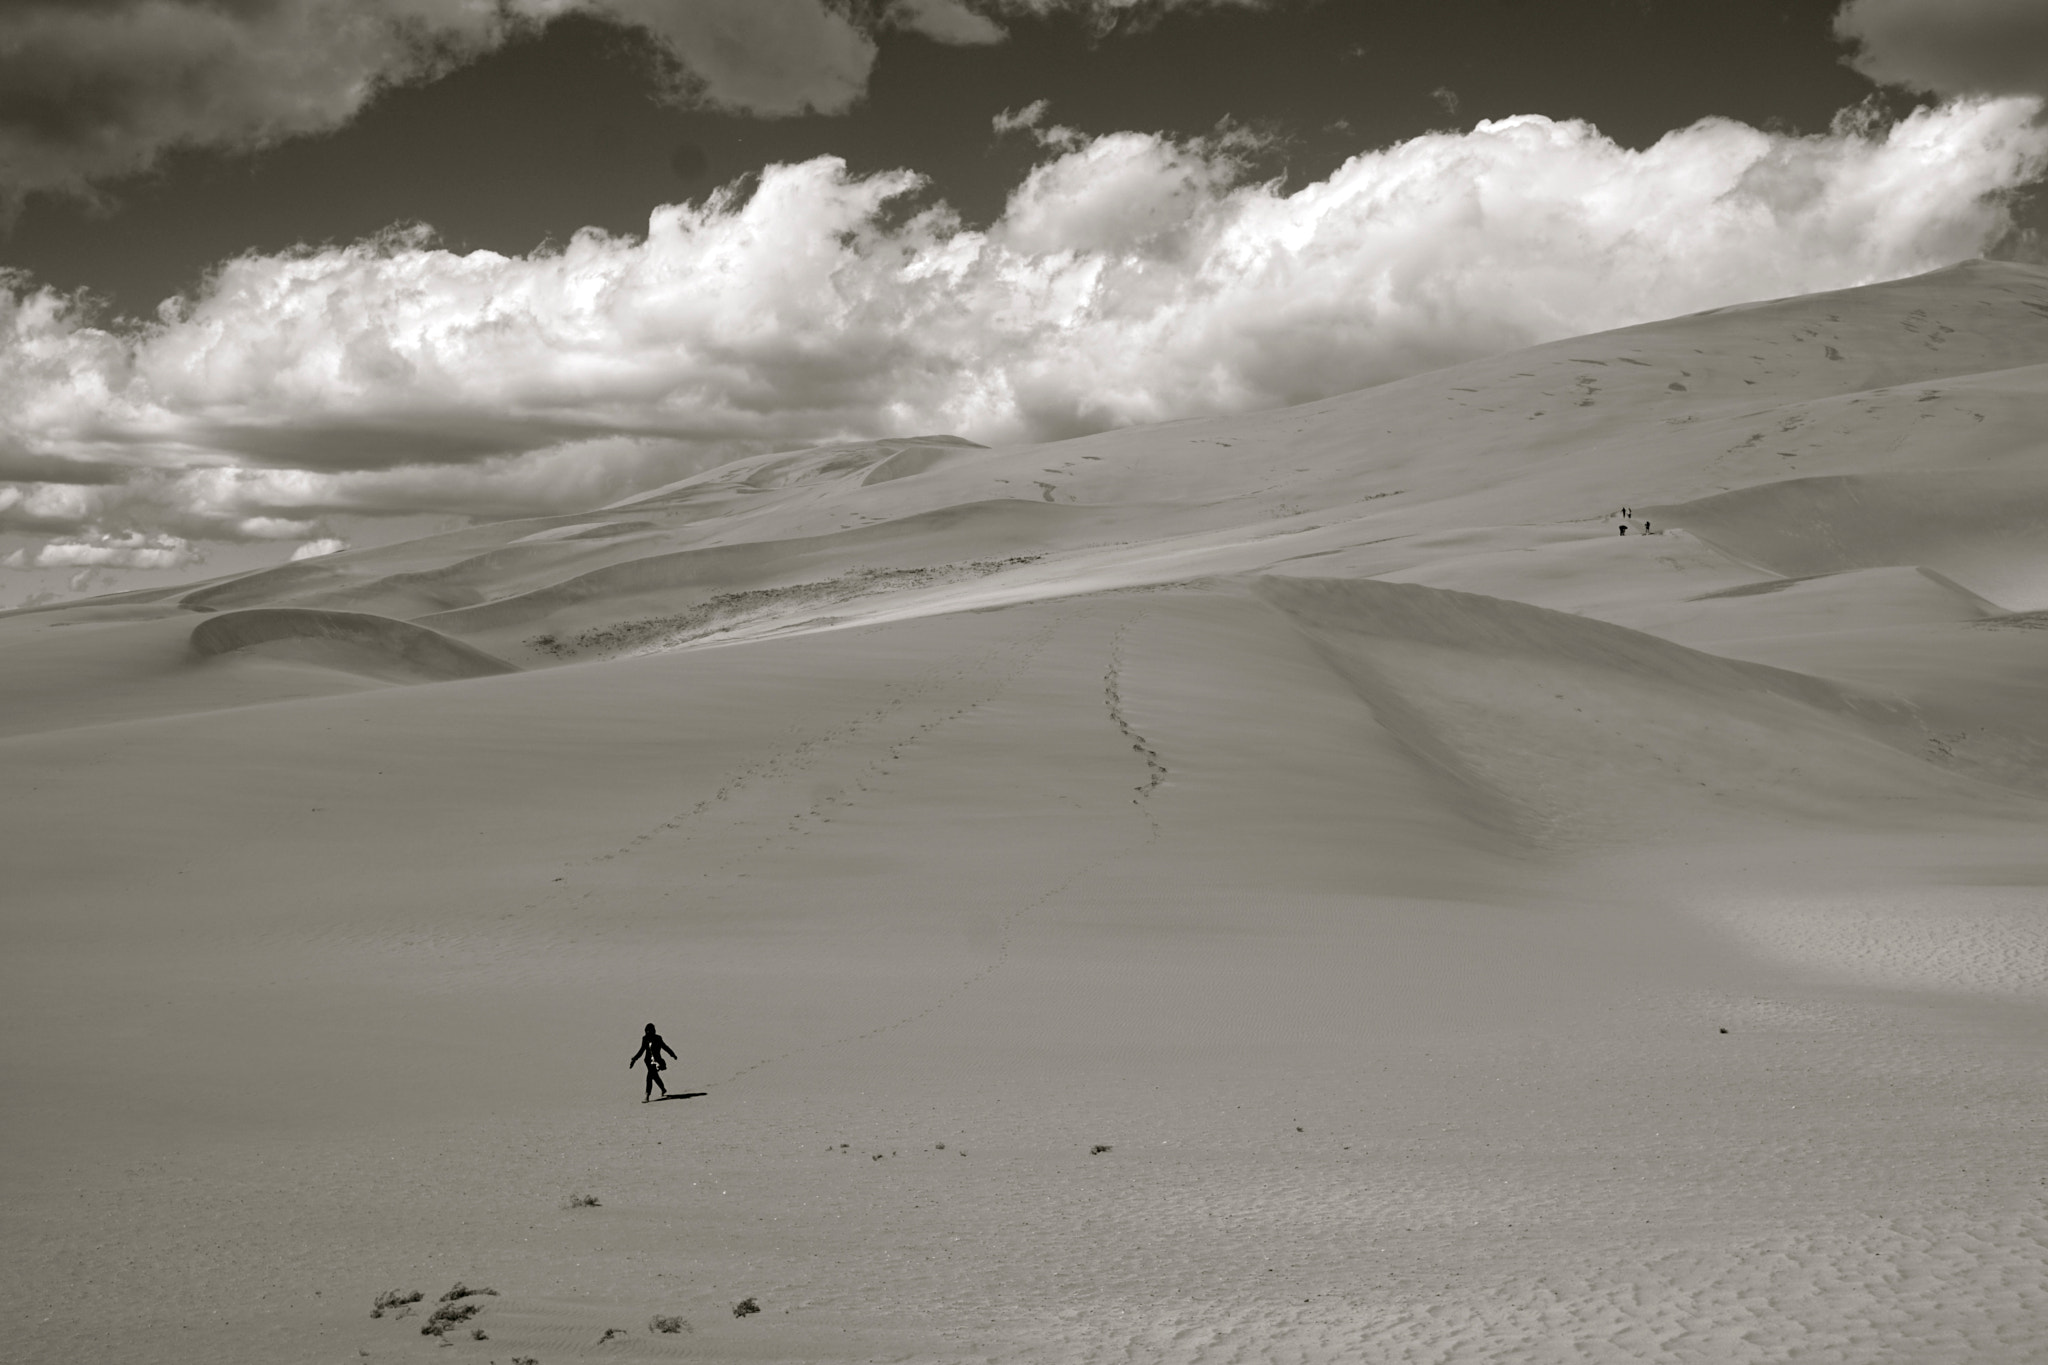 Sony a6000 sample photo. The hiker in the dunes photography